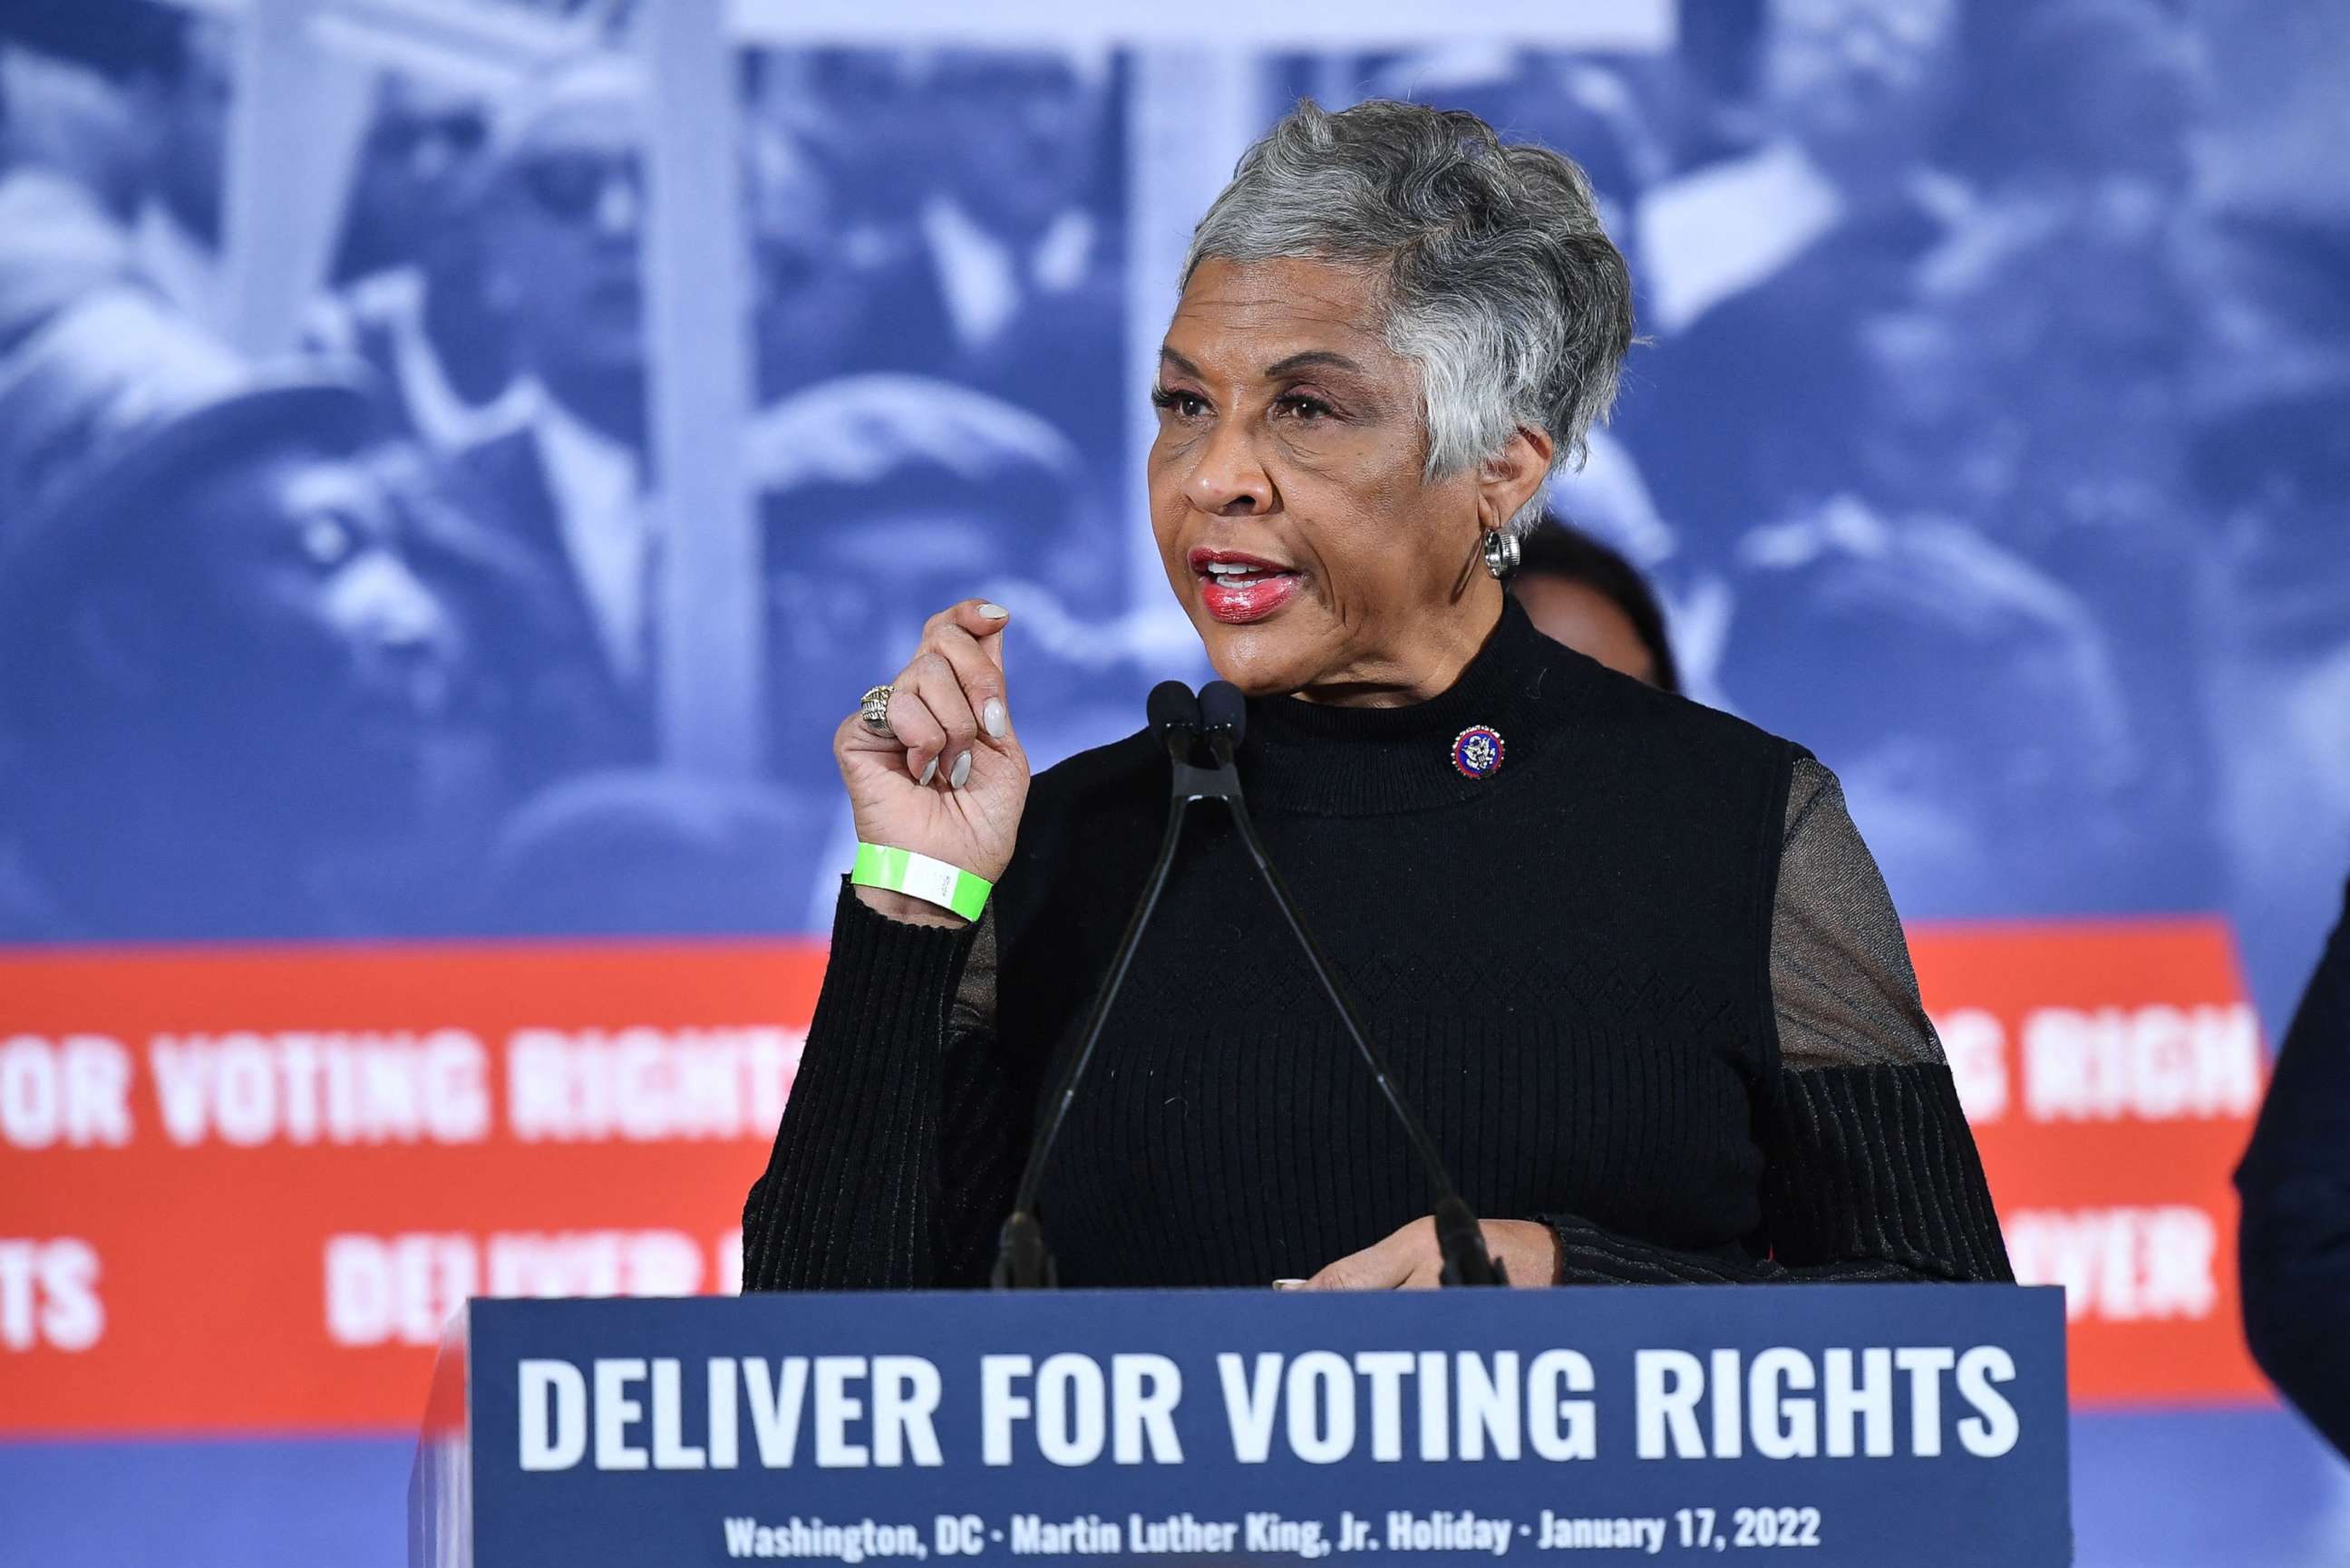 PHOTO: In this Jan. 17, 2022, file photo, Rep. Joyce Beatty, chairwoman of the Congressional Black Caucus, speaks in Washington, D.C.